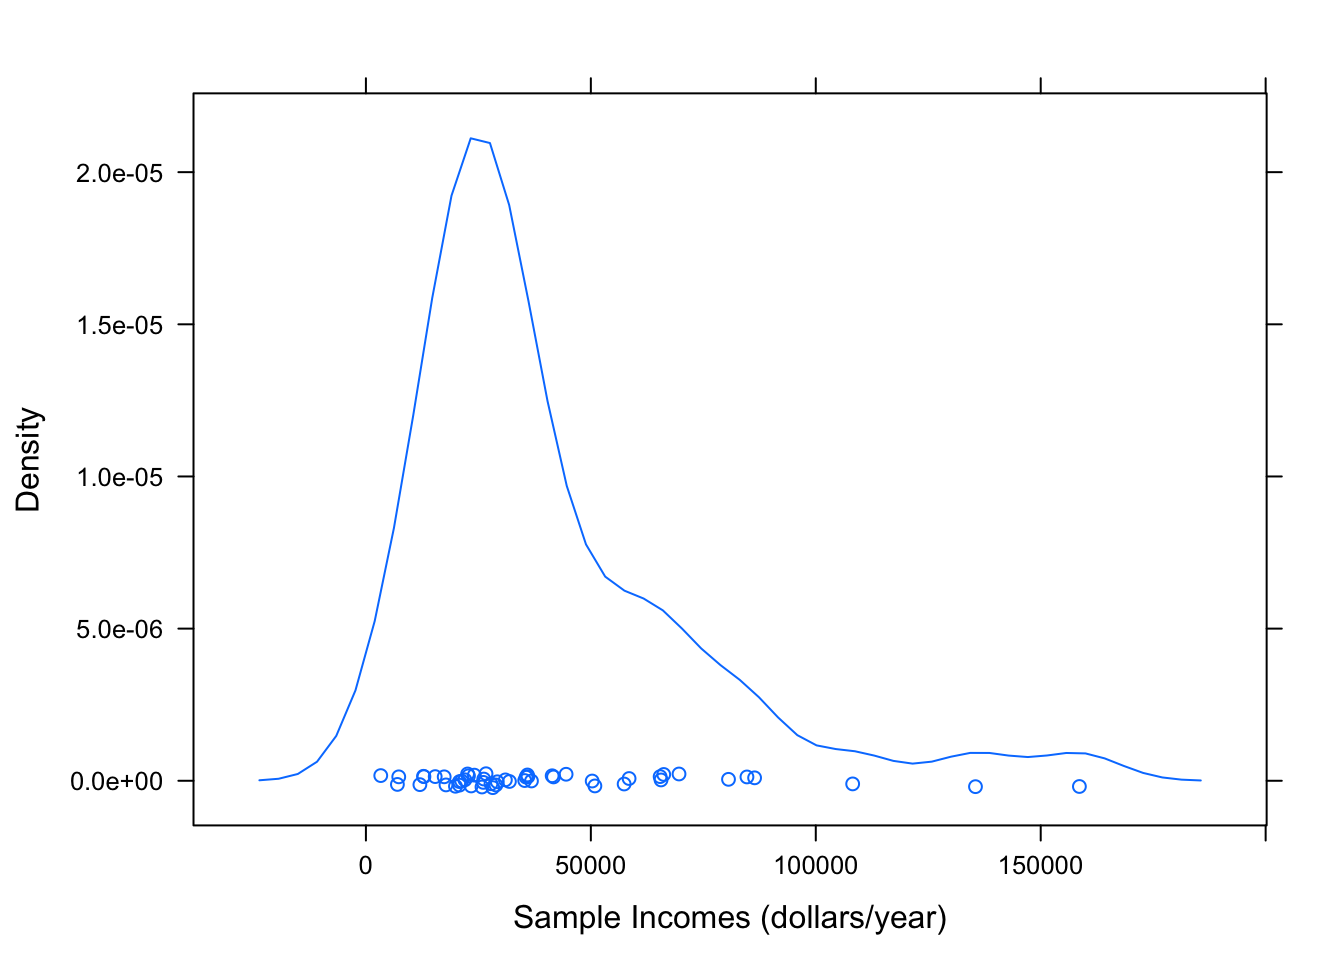 Density plot of the sample incomes.  Since the random sample is probably a good cross-sectional representation of the population, we can use the plot to get some idea of the distribution of the population itself.